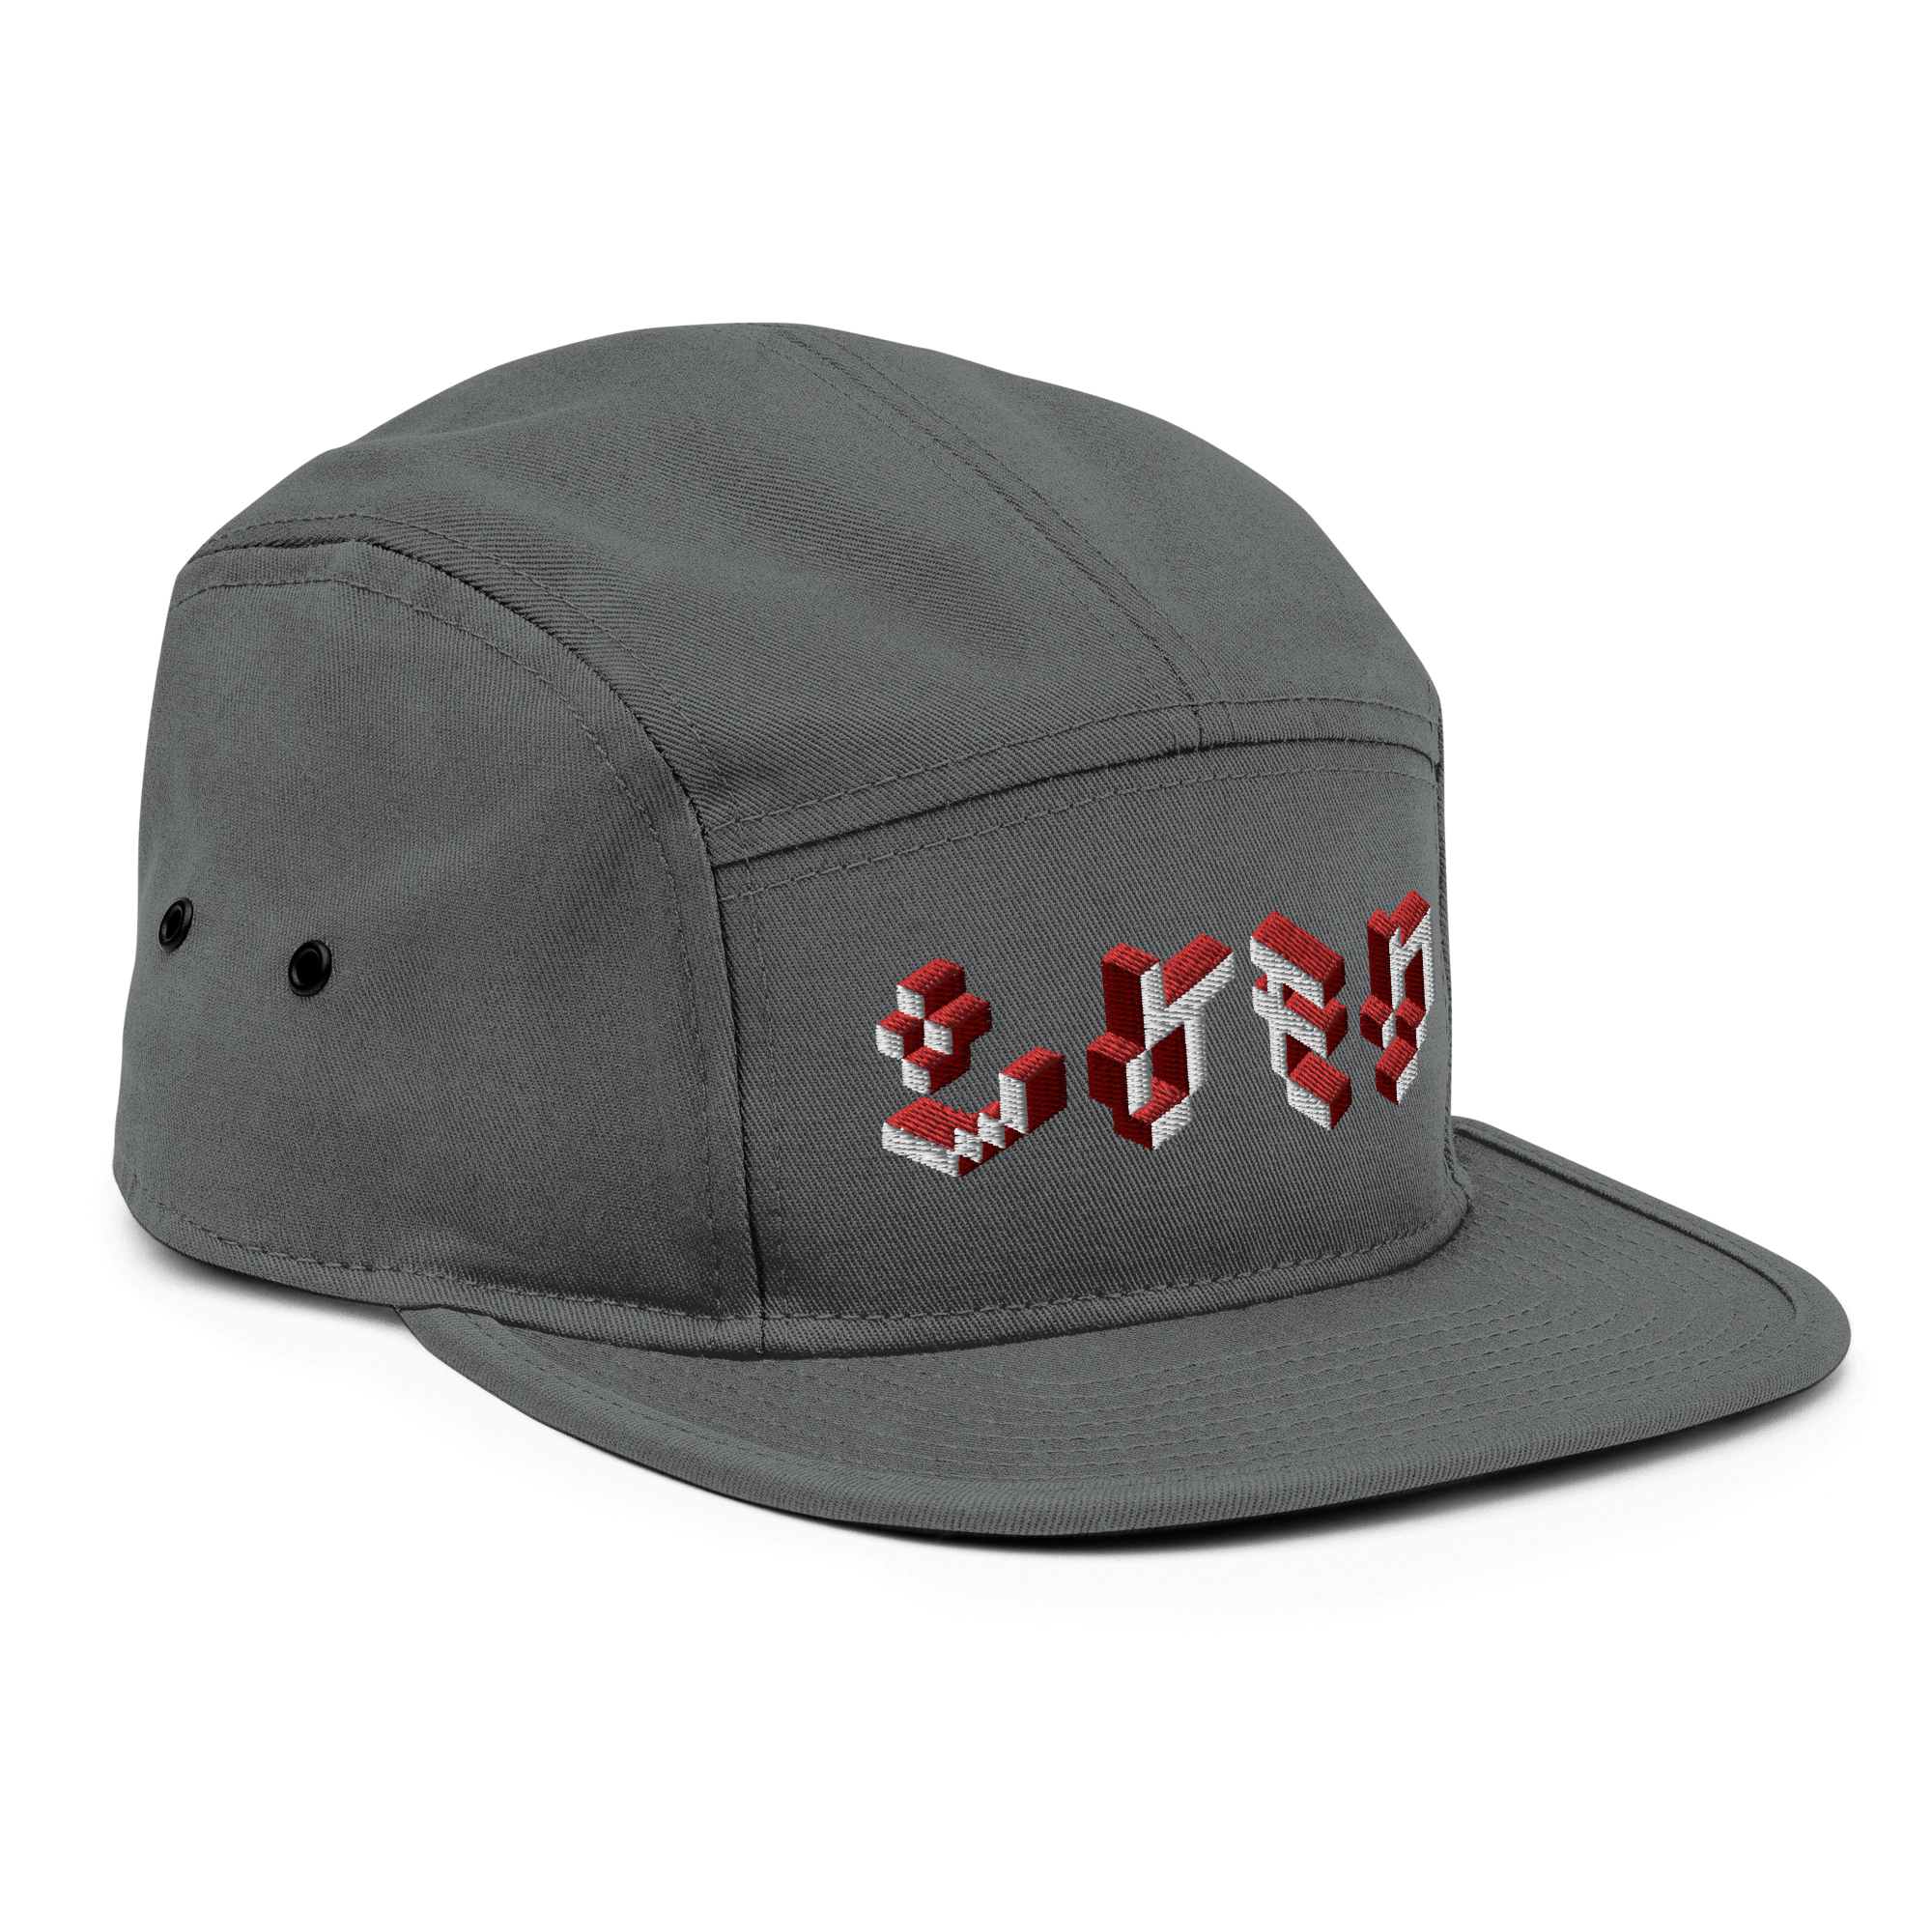 Shikemoku Camper CapUnleash nostalgia with our 8-bit 'Shikemoku' design in Katakana Japanese, capturing the essence of 'Cigarette Butt.' This structured camper cap boasts a firm front panel, tailored just for you upon ordering. While it takes a bit longer